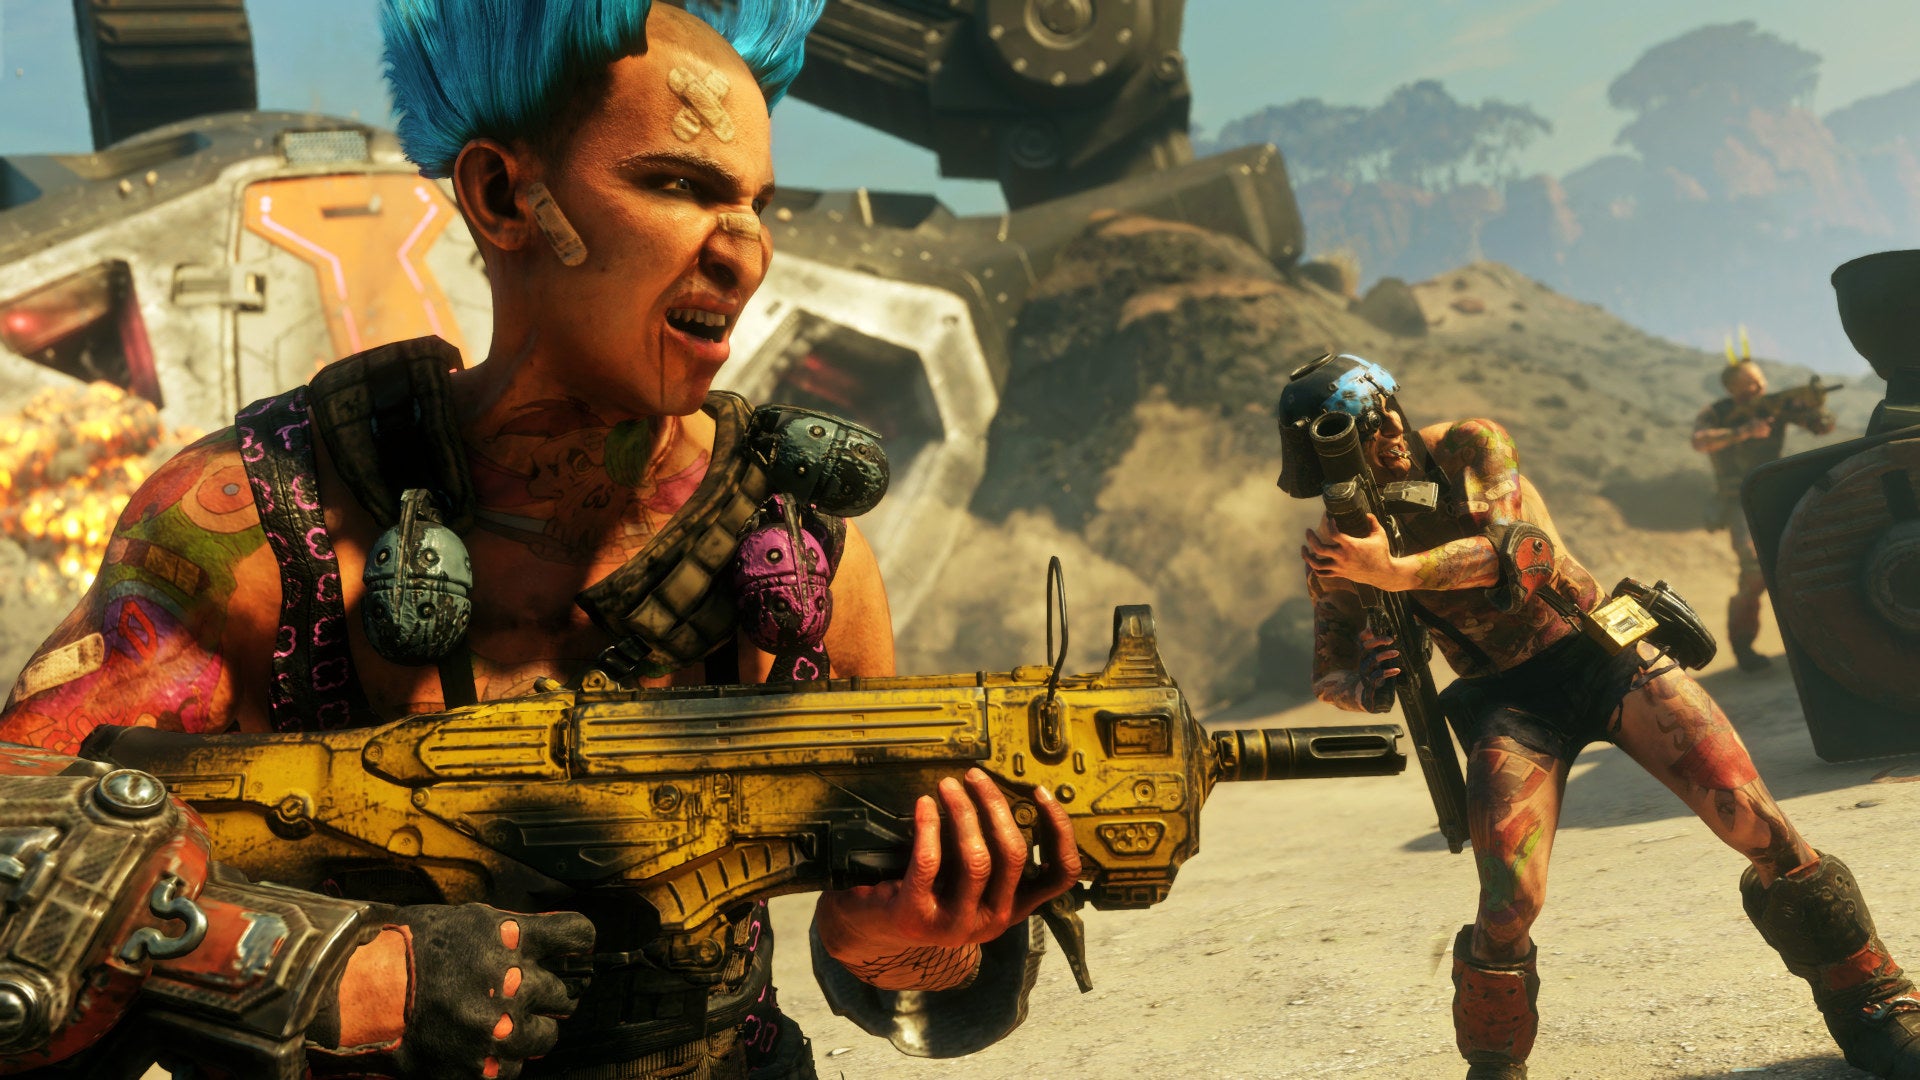 Rage 2 is free to maintain through the Epic Games Store this week